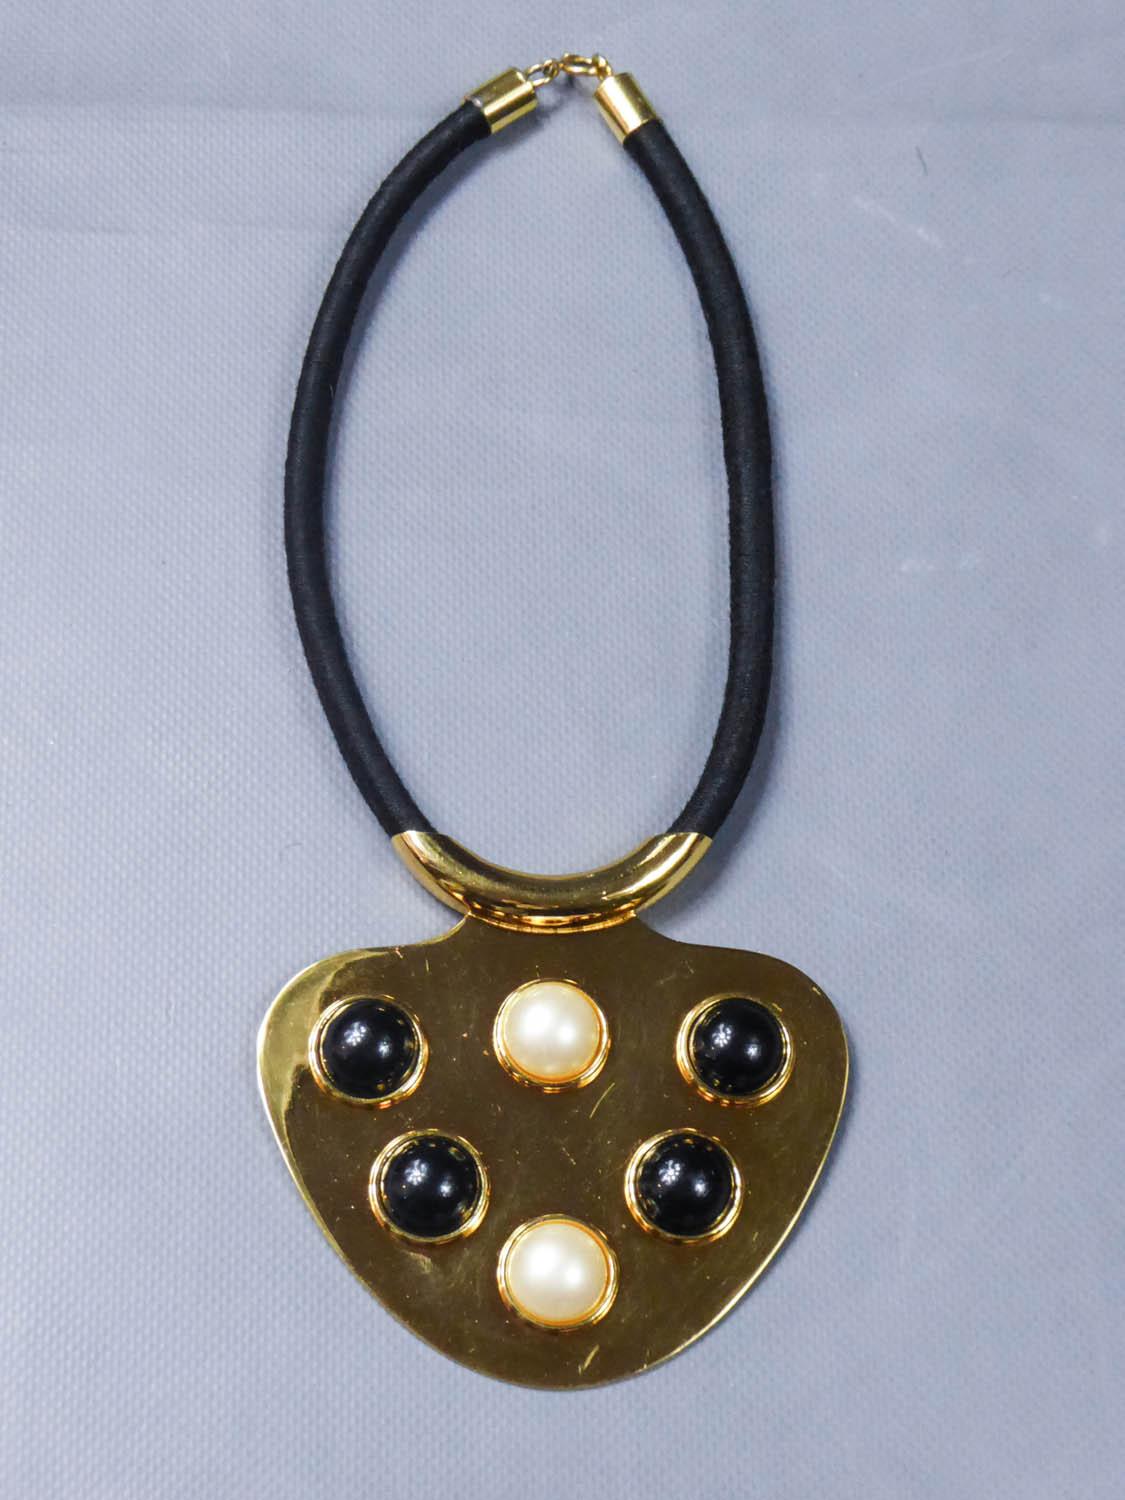 Art Deco Iconic Space Age Necklace by Lanvin Circa 1970 For Sale